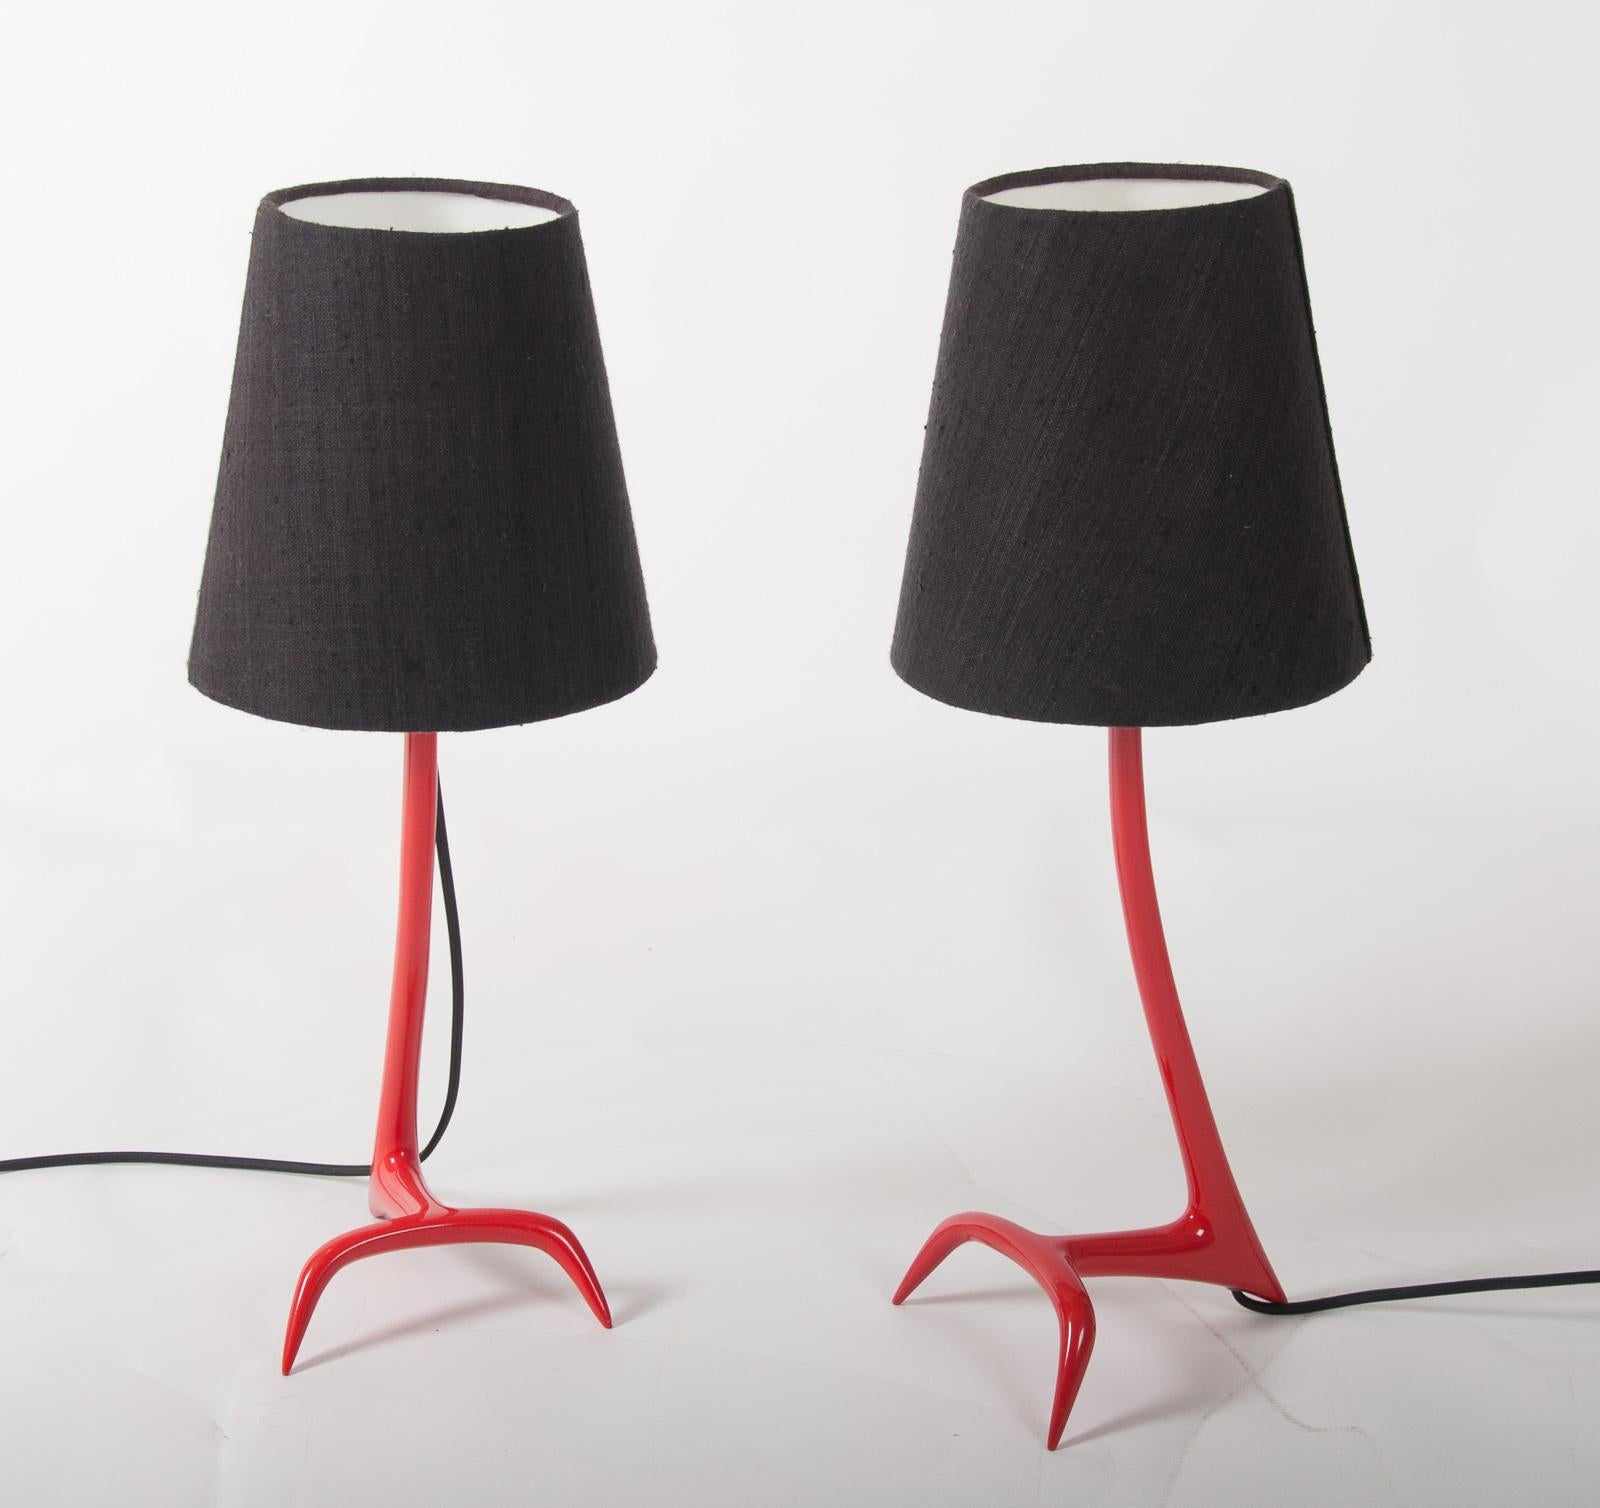 Matched Pair of Stockholm Table Lamps by Maison Charles In Good Condition In Henley-on Thames, Oxfordshire